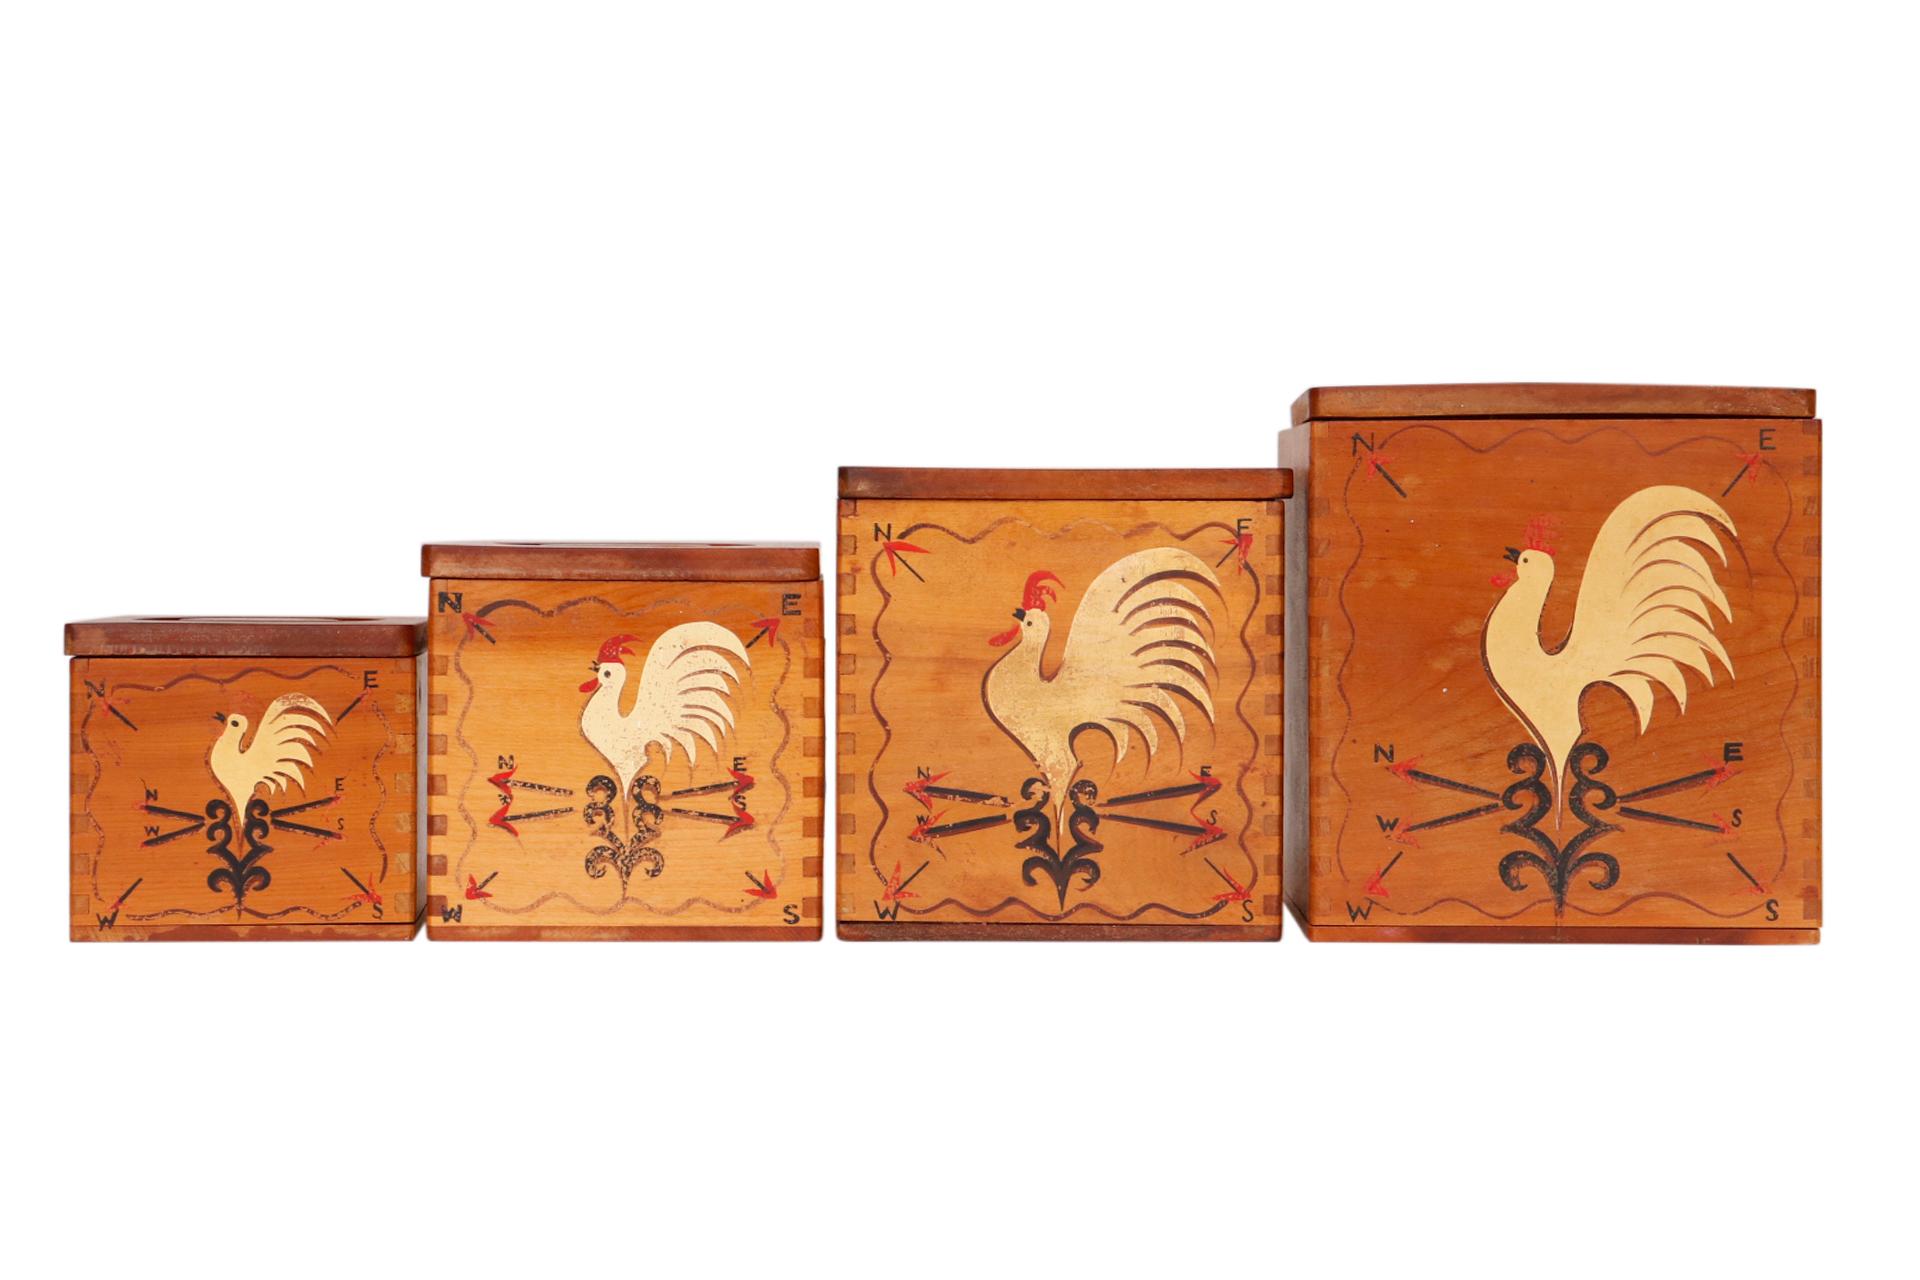 A set of four nesting kitchen canisters made of wood. Each is constructed with dovetailed corners and decorated in front with a chicken weathervane. Lids lift off with round recessed handles. Marked underneath “The Redbird Line, Hand Decorated